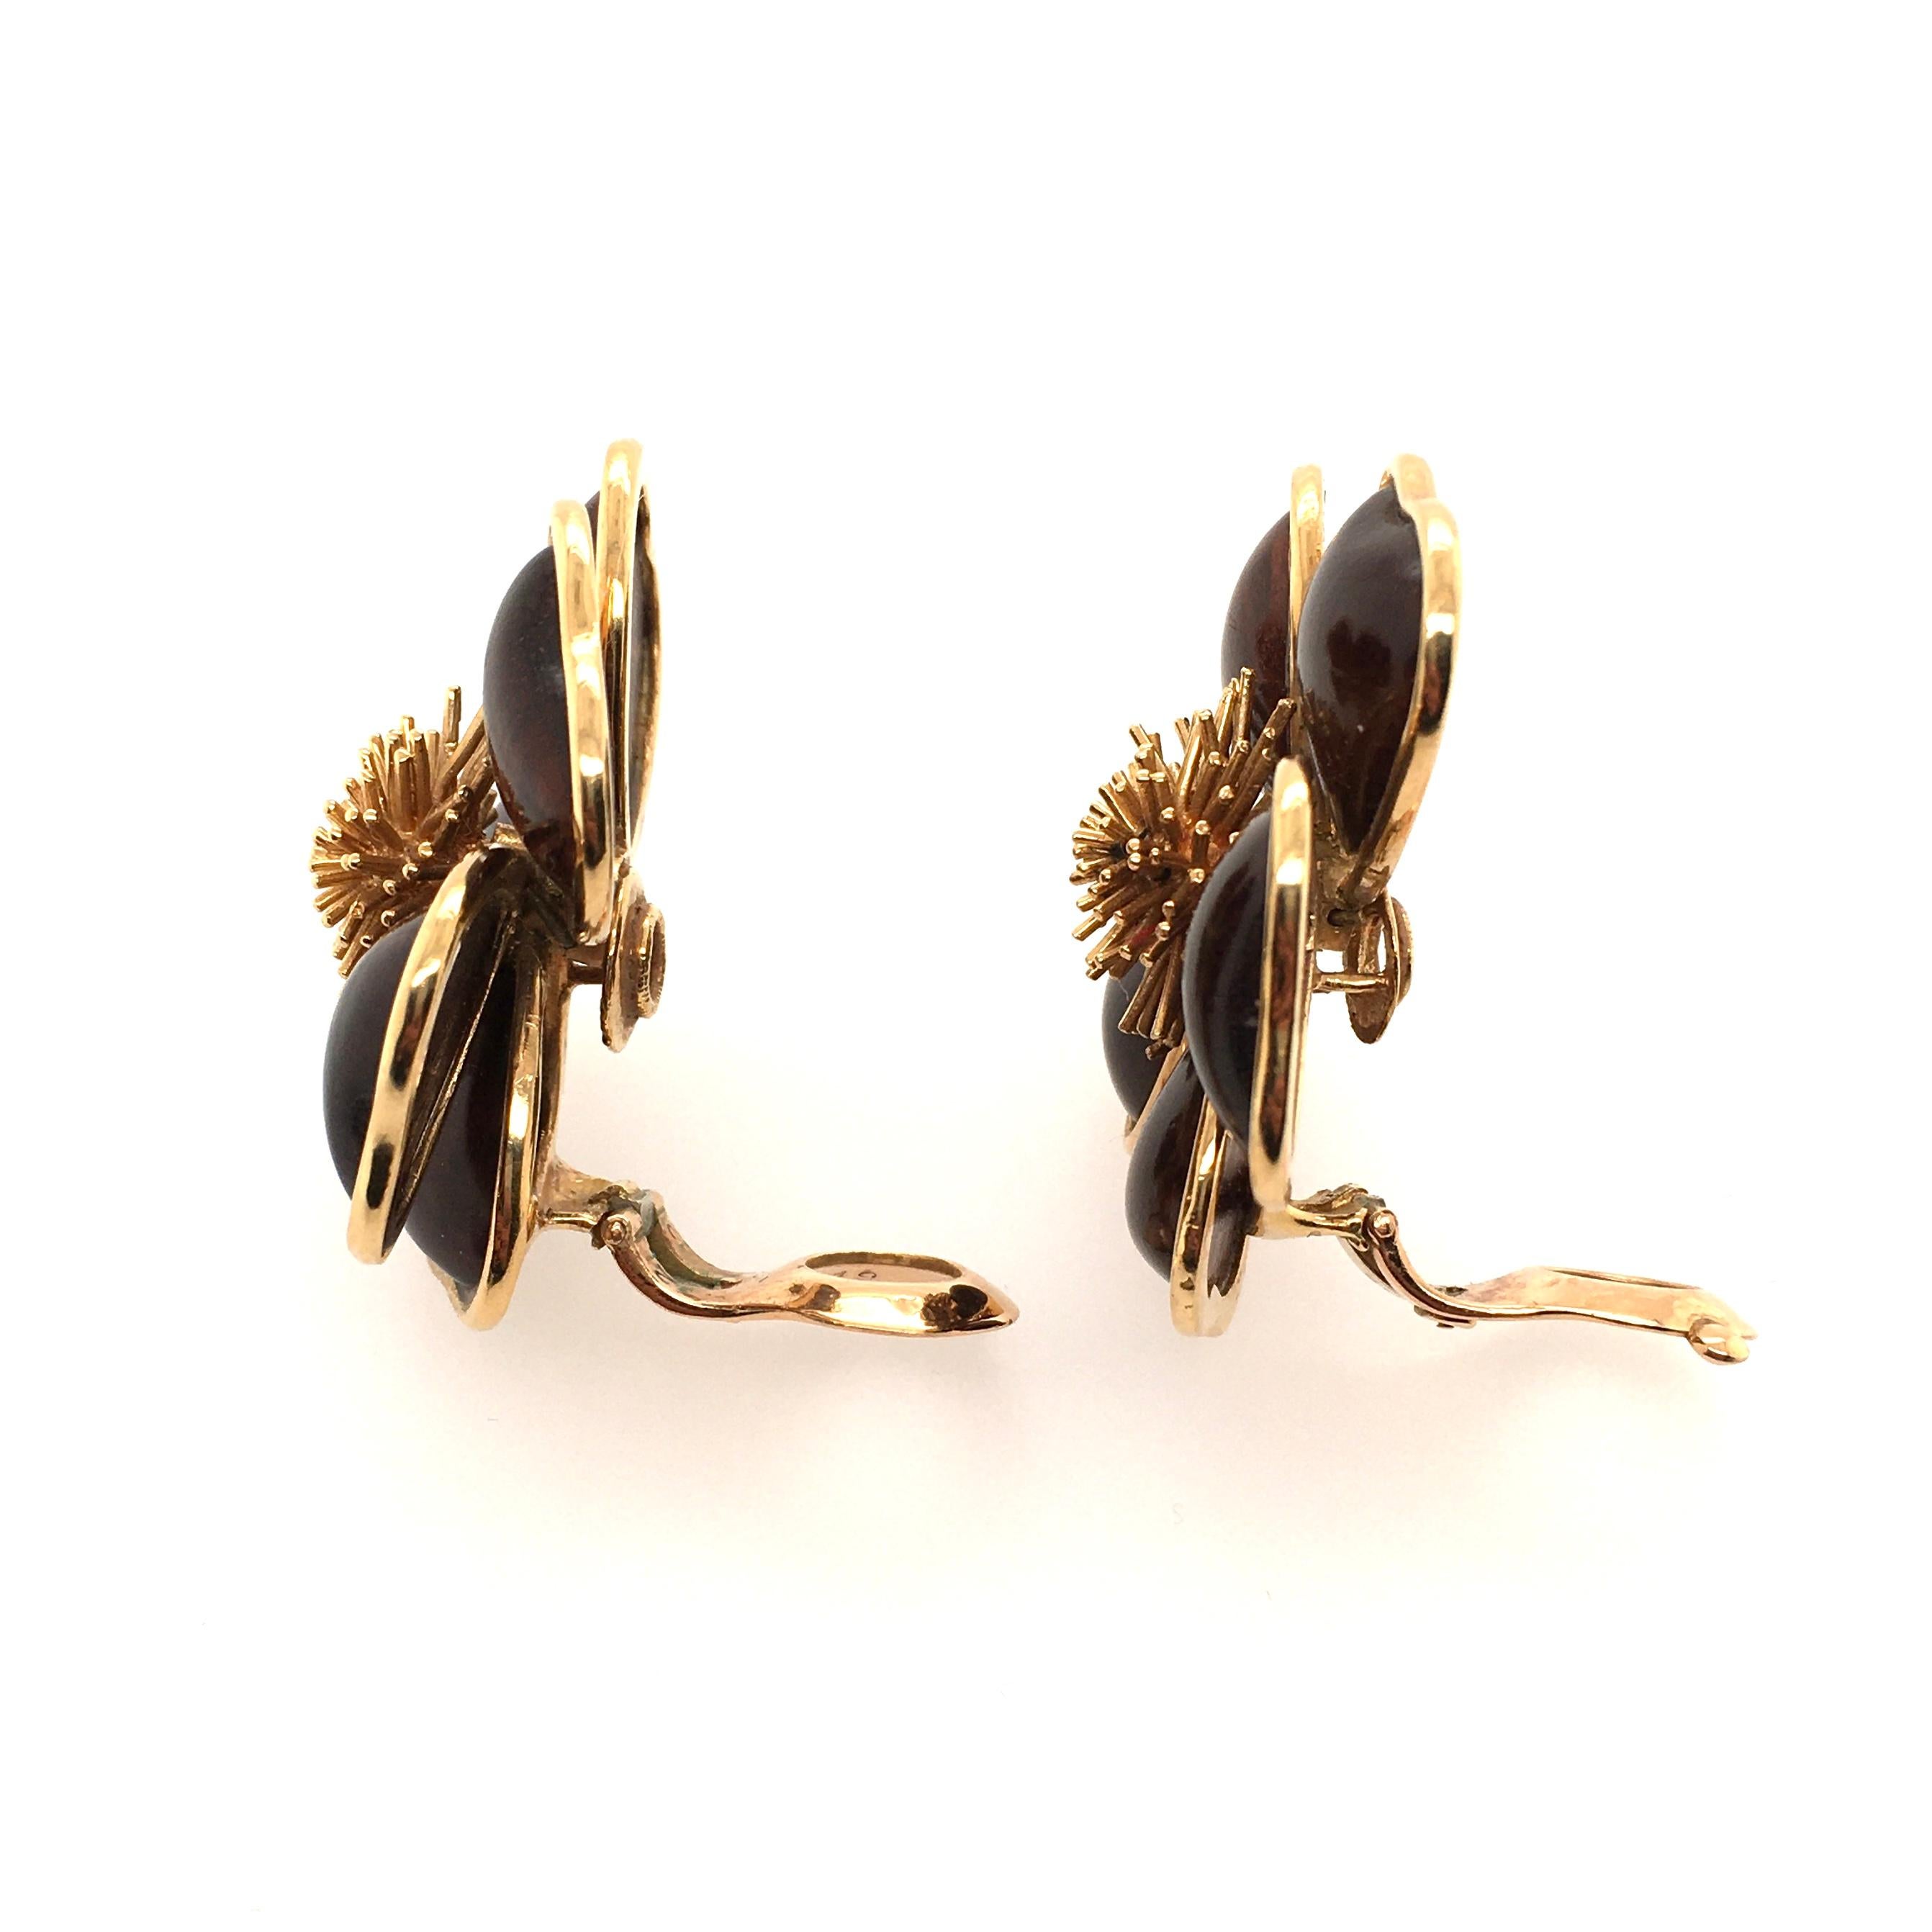 A pair of 18 karat yellow gold and wood Nerval earrings. Van Cleef & Arpels. Designed as a sculpted 18k gold flower with wooden petals, centering a gold spray. Diameter is approximately 1 inch, gross weight is approximately 31.8 grams. Stamped VCA,